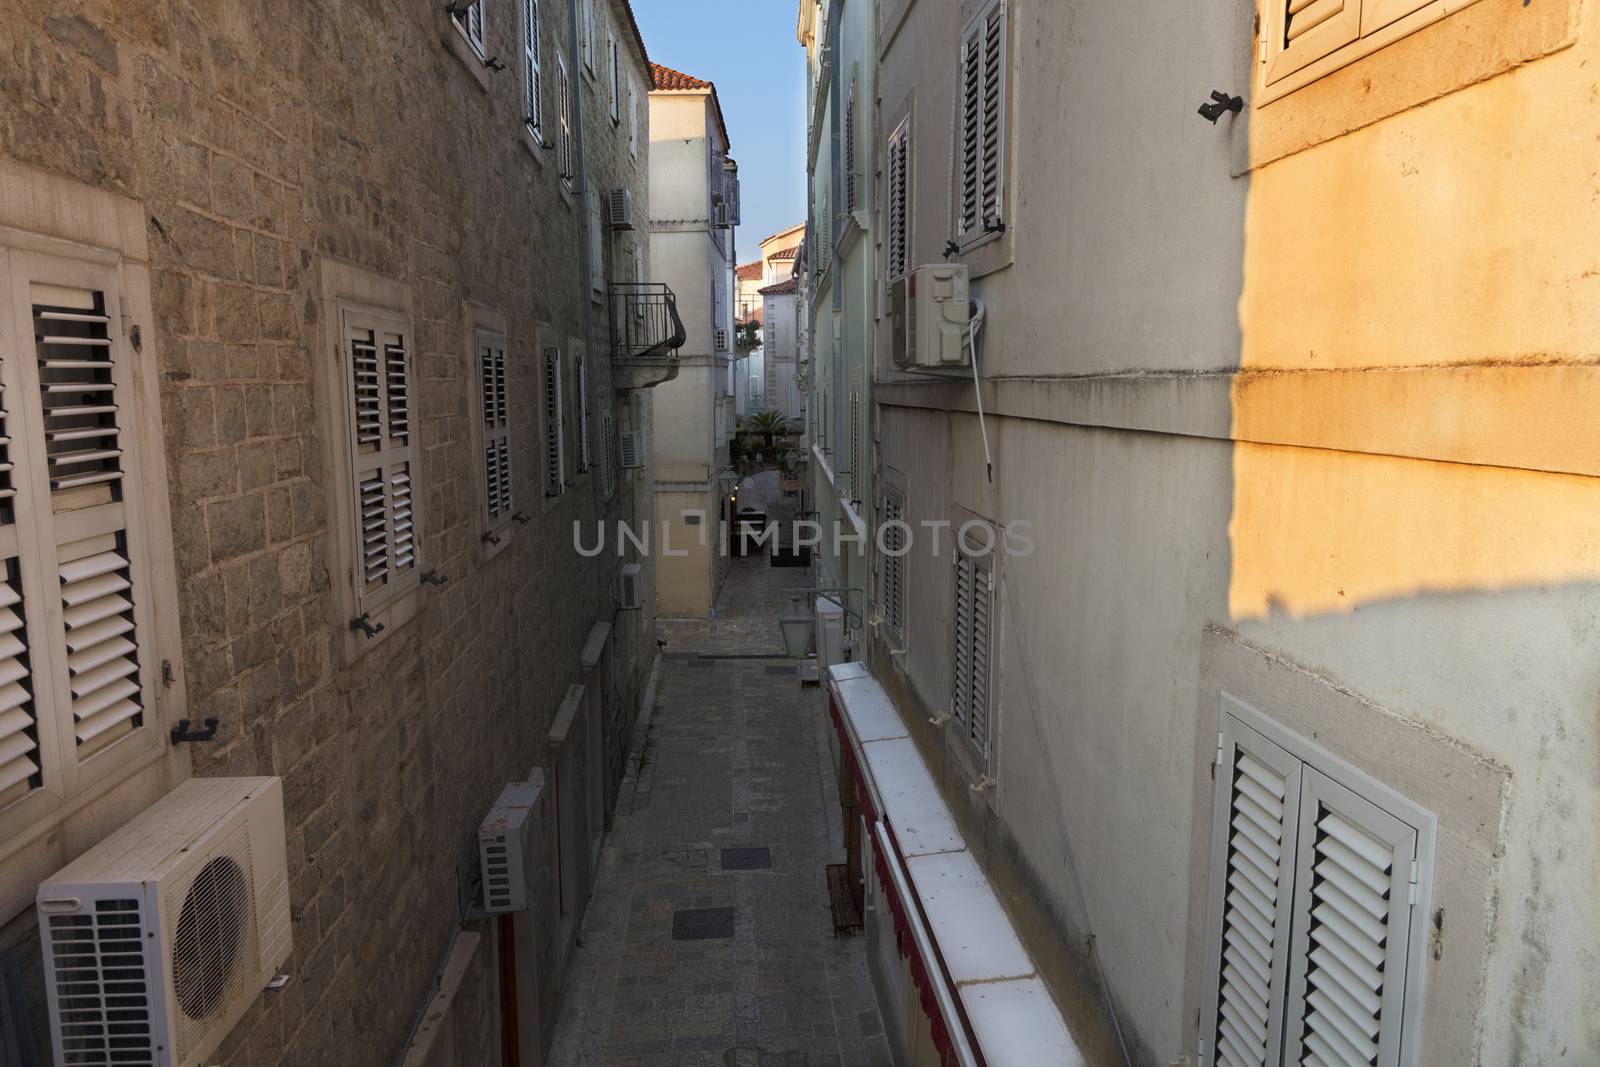 The old town of Budva in Montenegro, early morning, the sun creeps on a narrow street.